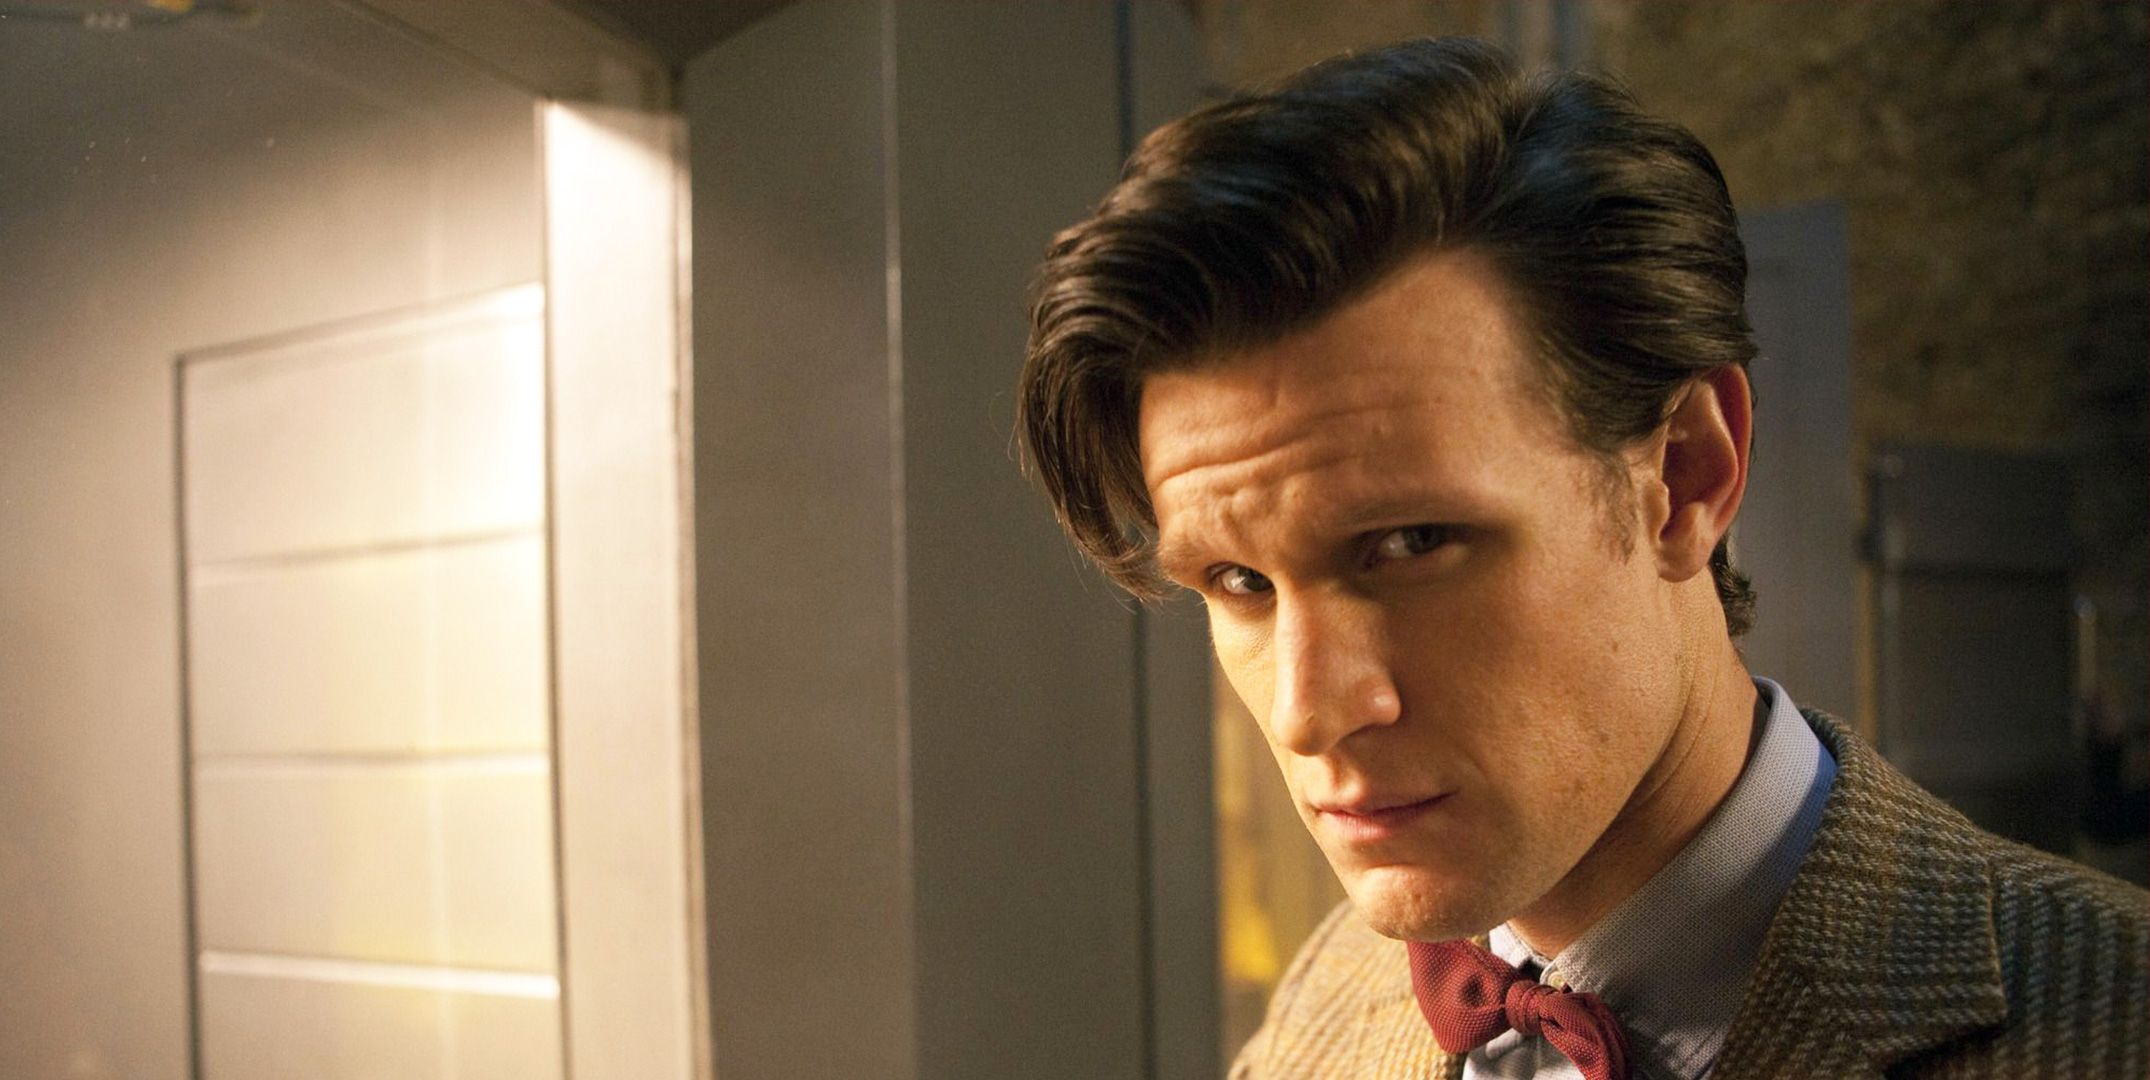 Eyeglasses worn by The 11th Doctor (Matt Smith) as seen in Doctor Who  S07E05 | Spotern